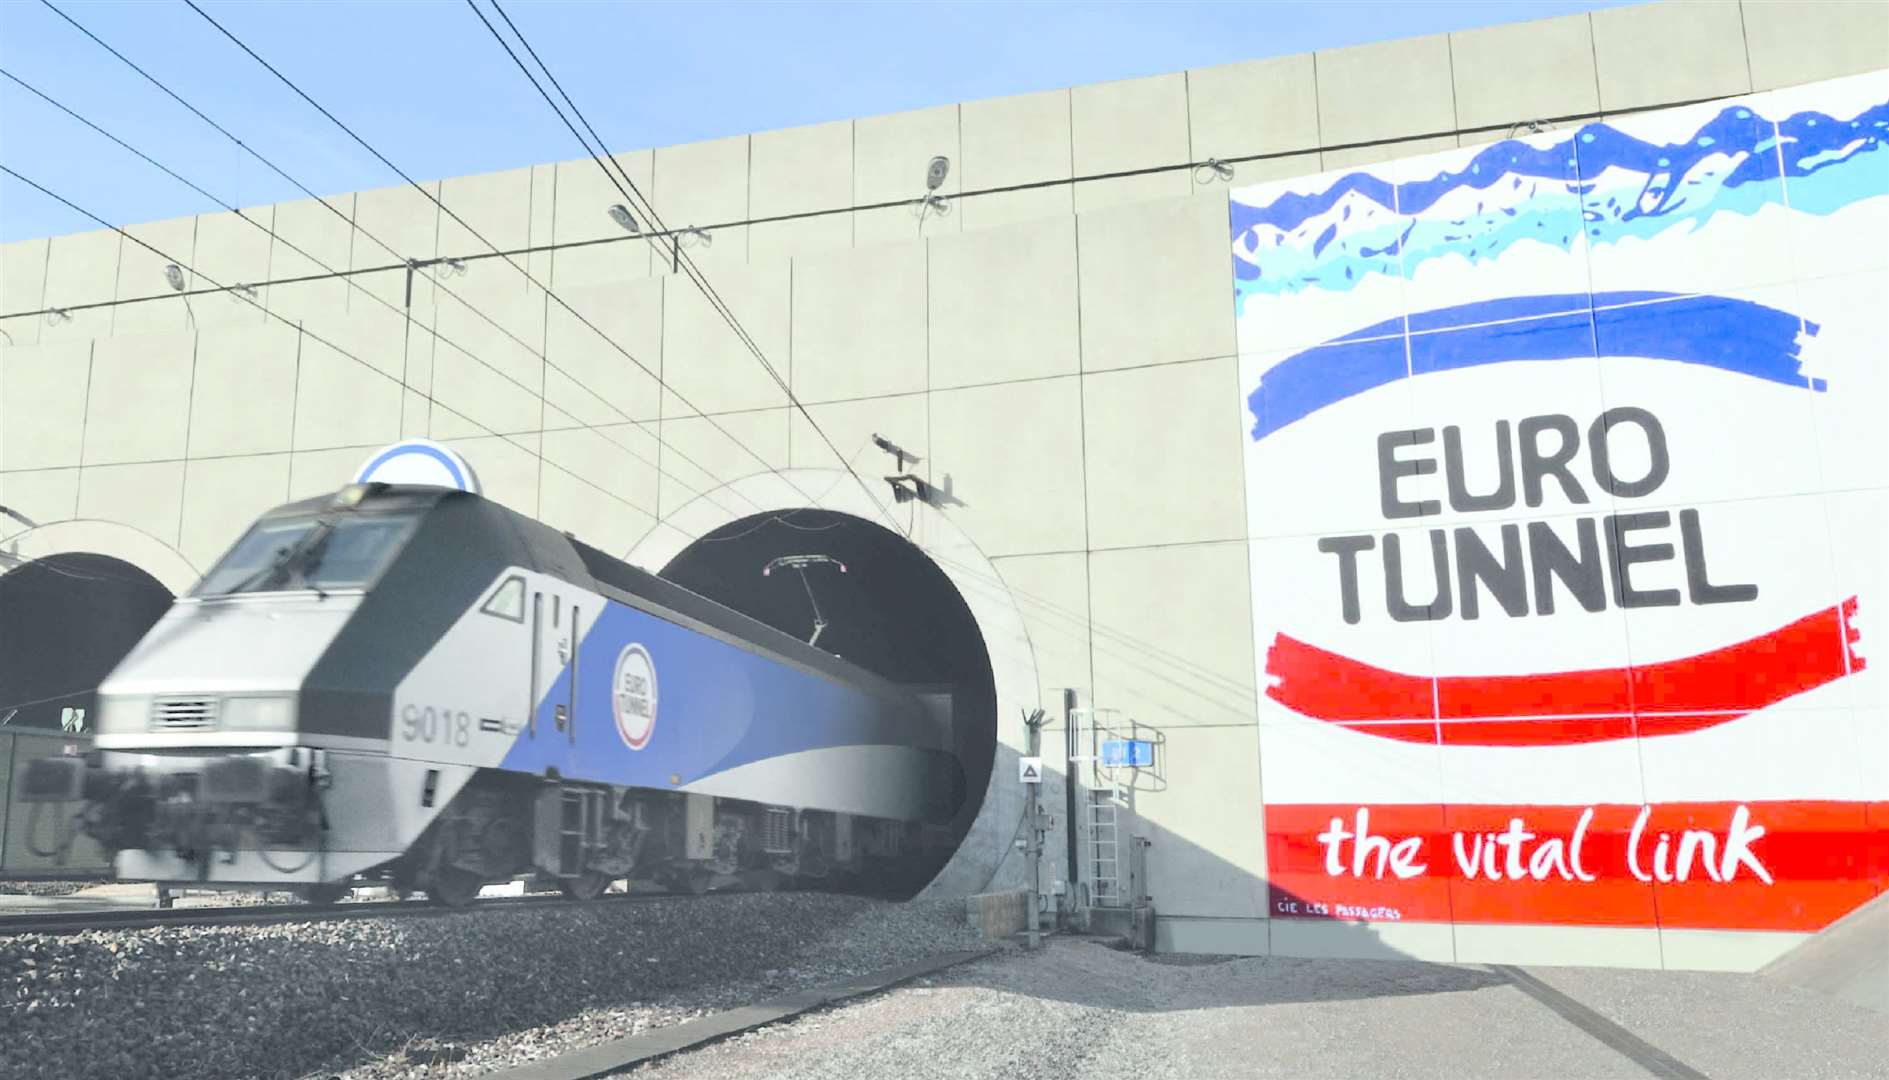 Eurotunnel marks its 25th anniversary this month